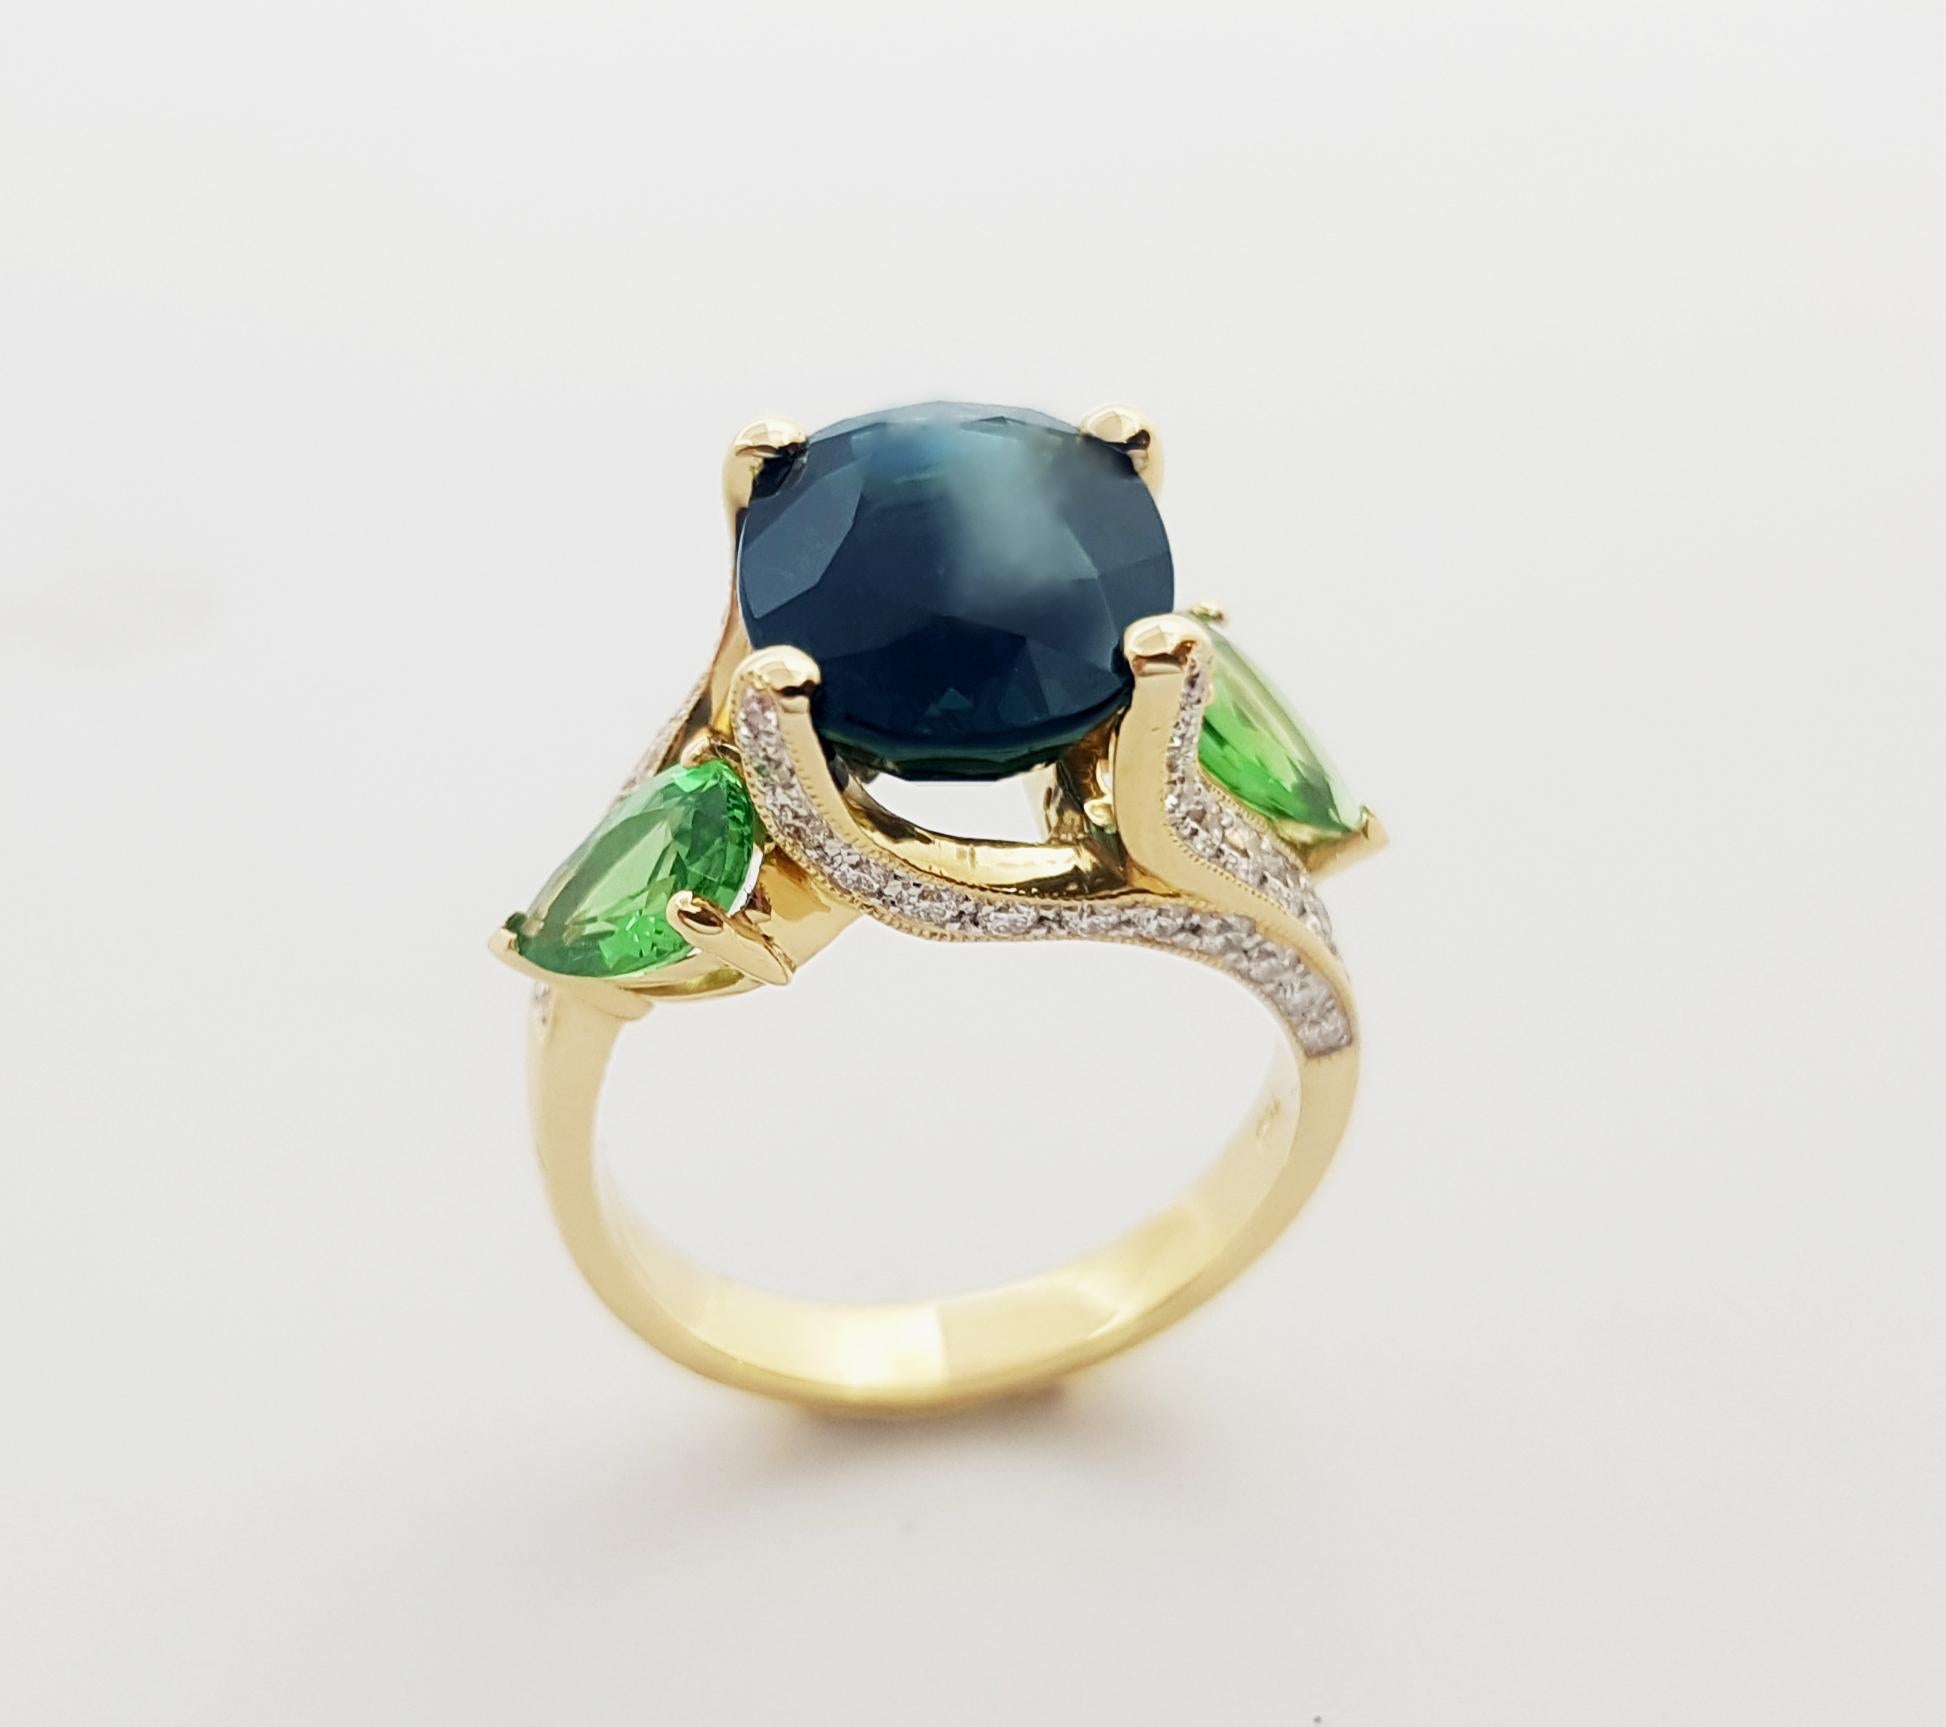 GIA Certified 5cts Blue Sapphire, Tsavorite and Diamond Ring in 18k White Gold For Sale 3